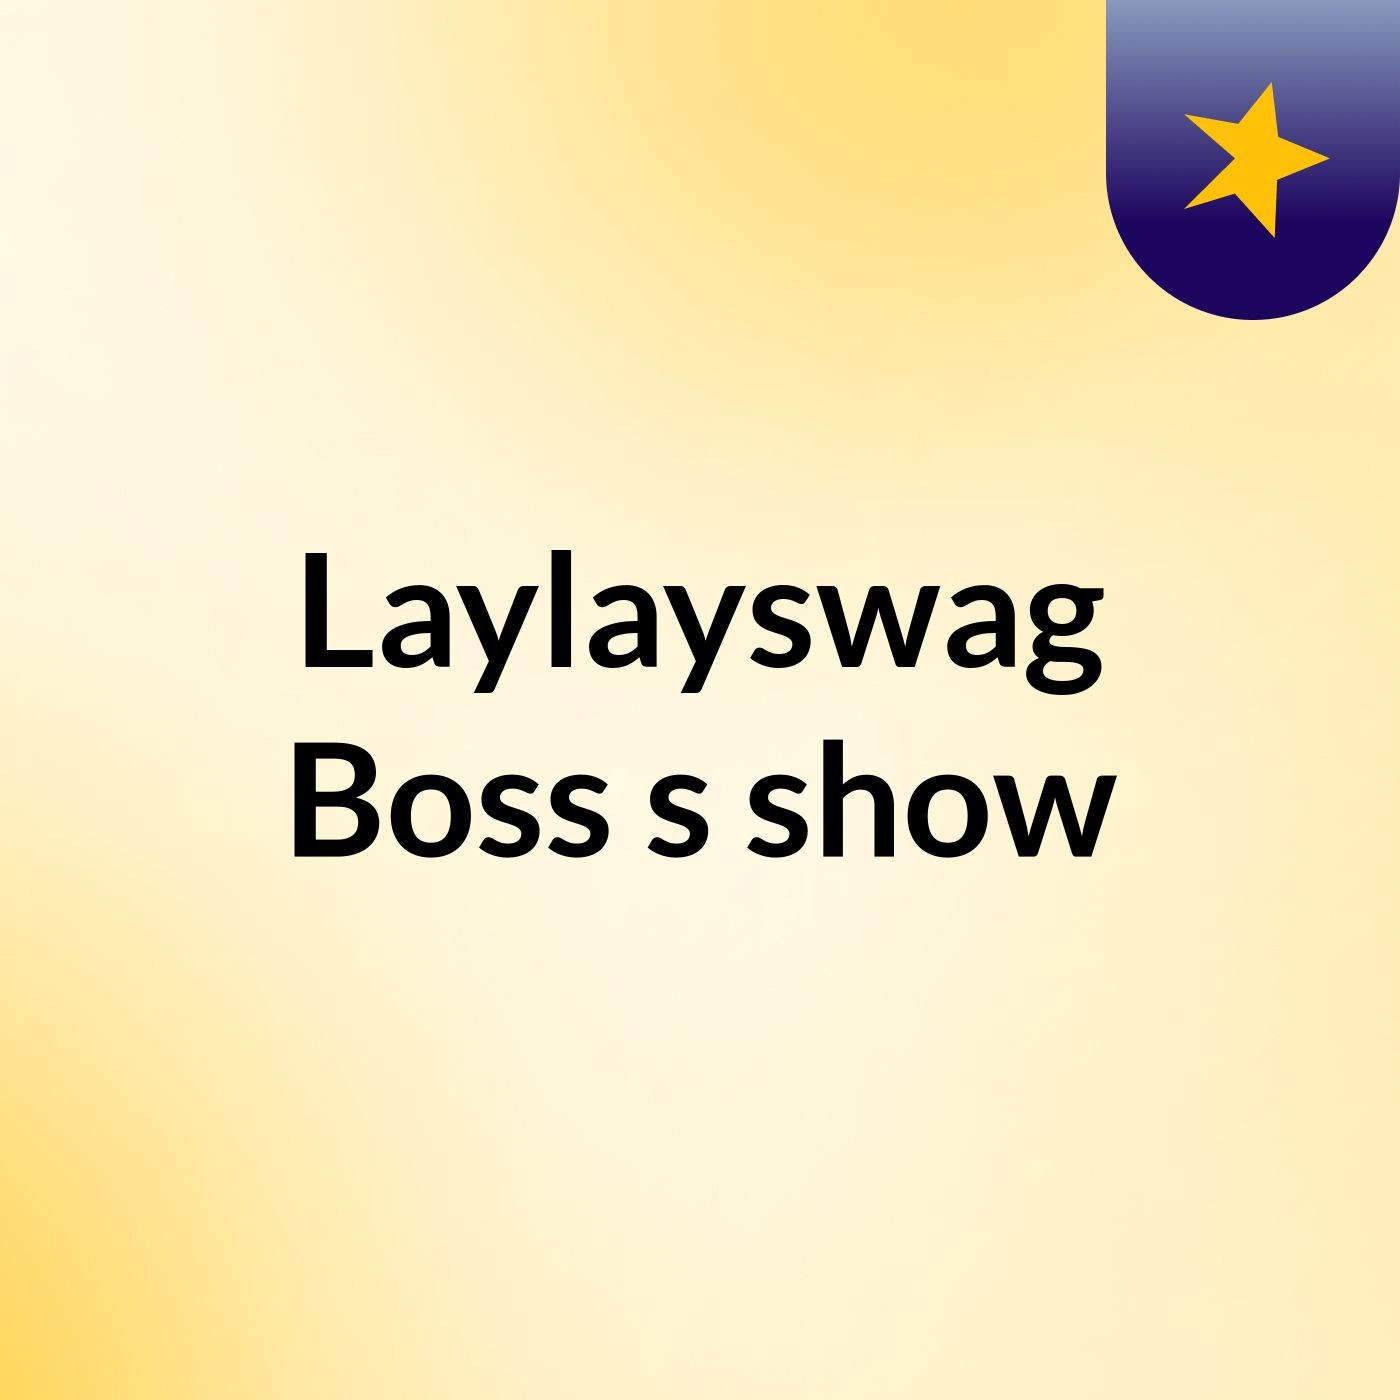 Laylayswag Boss's show